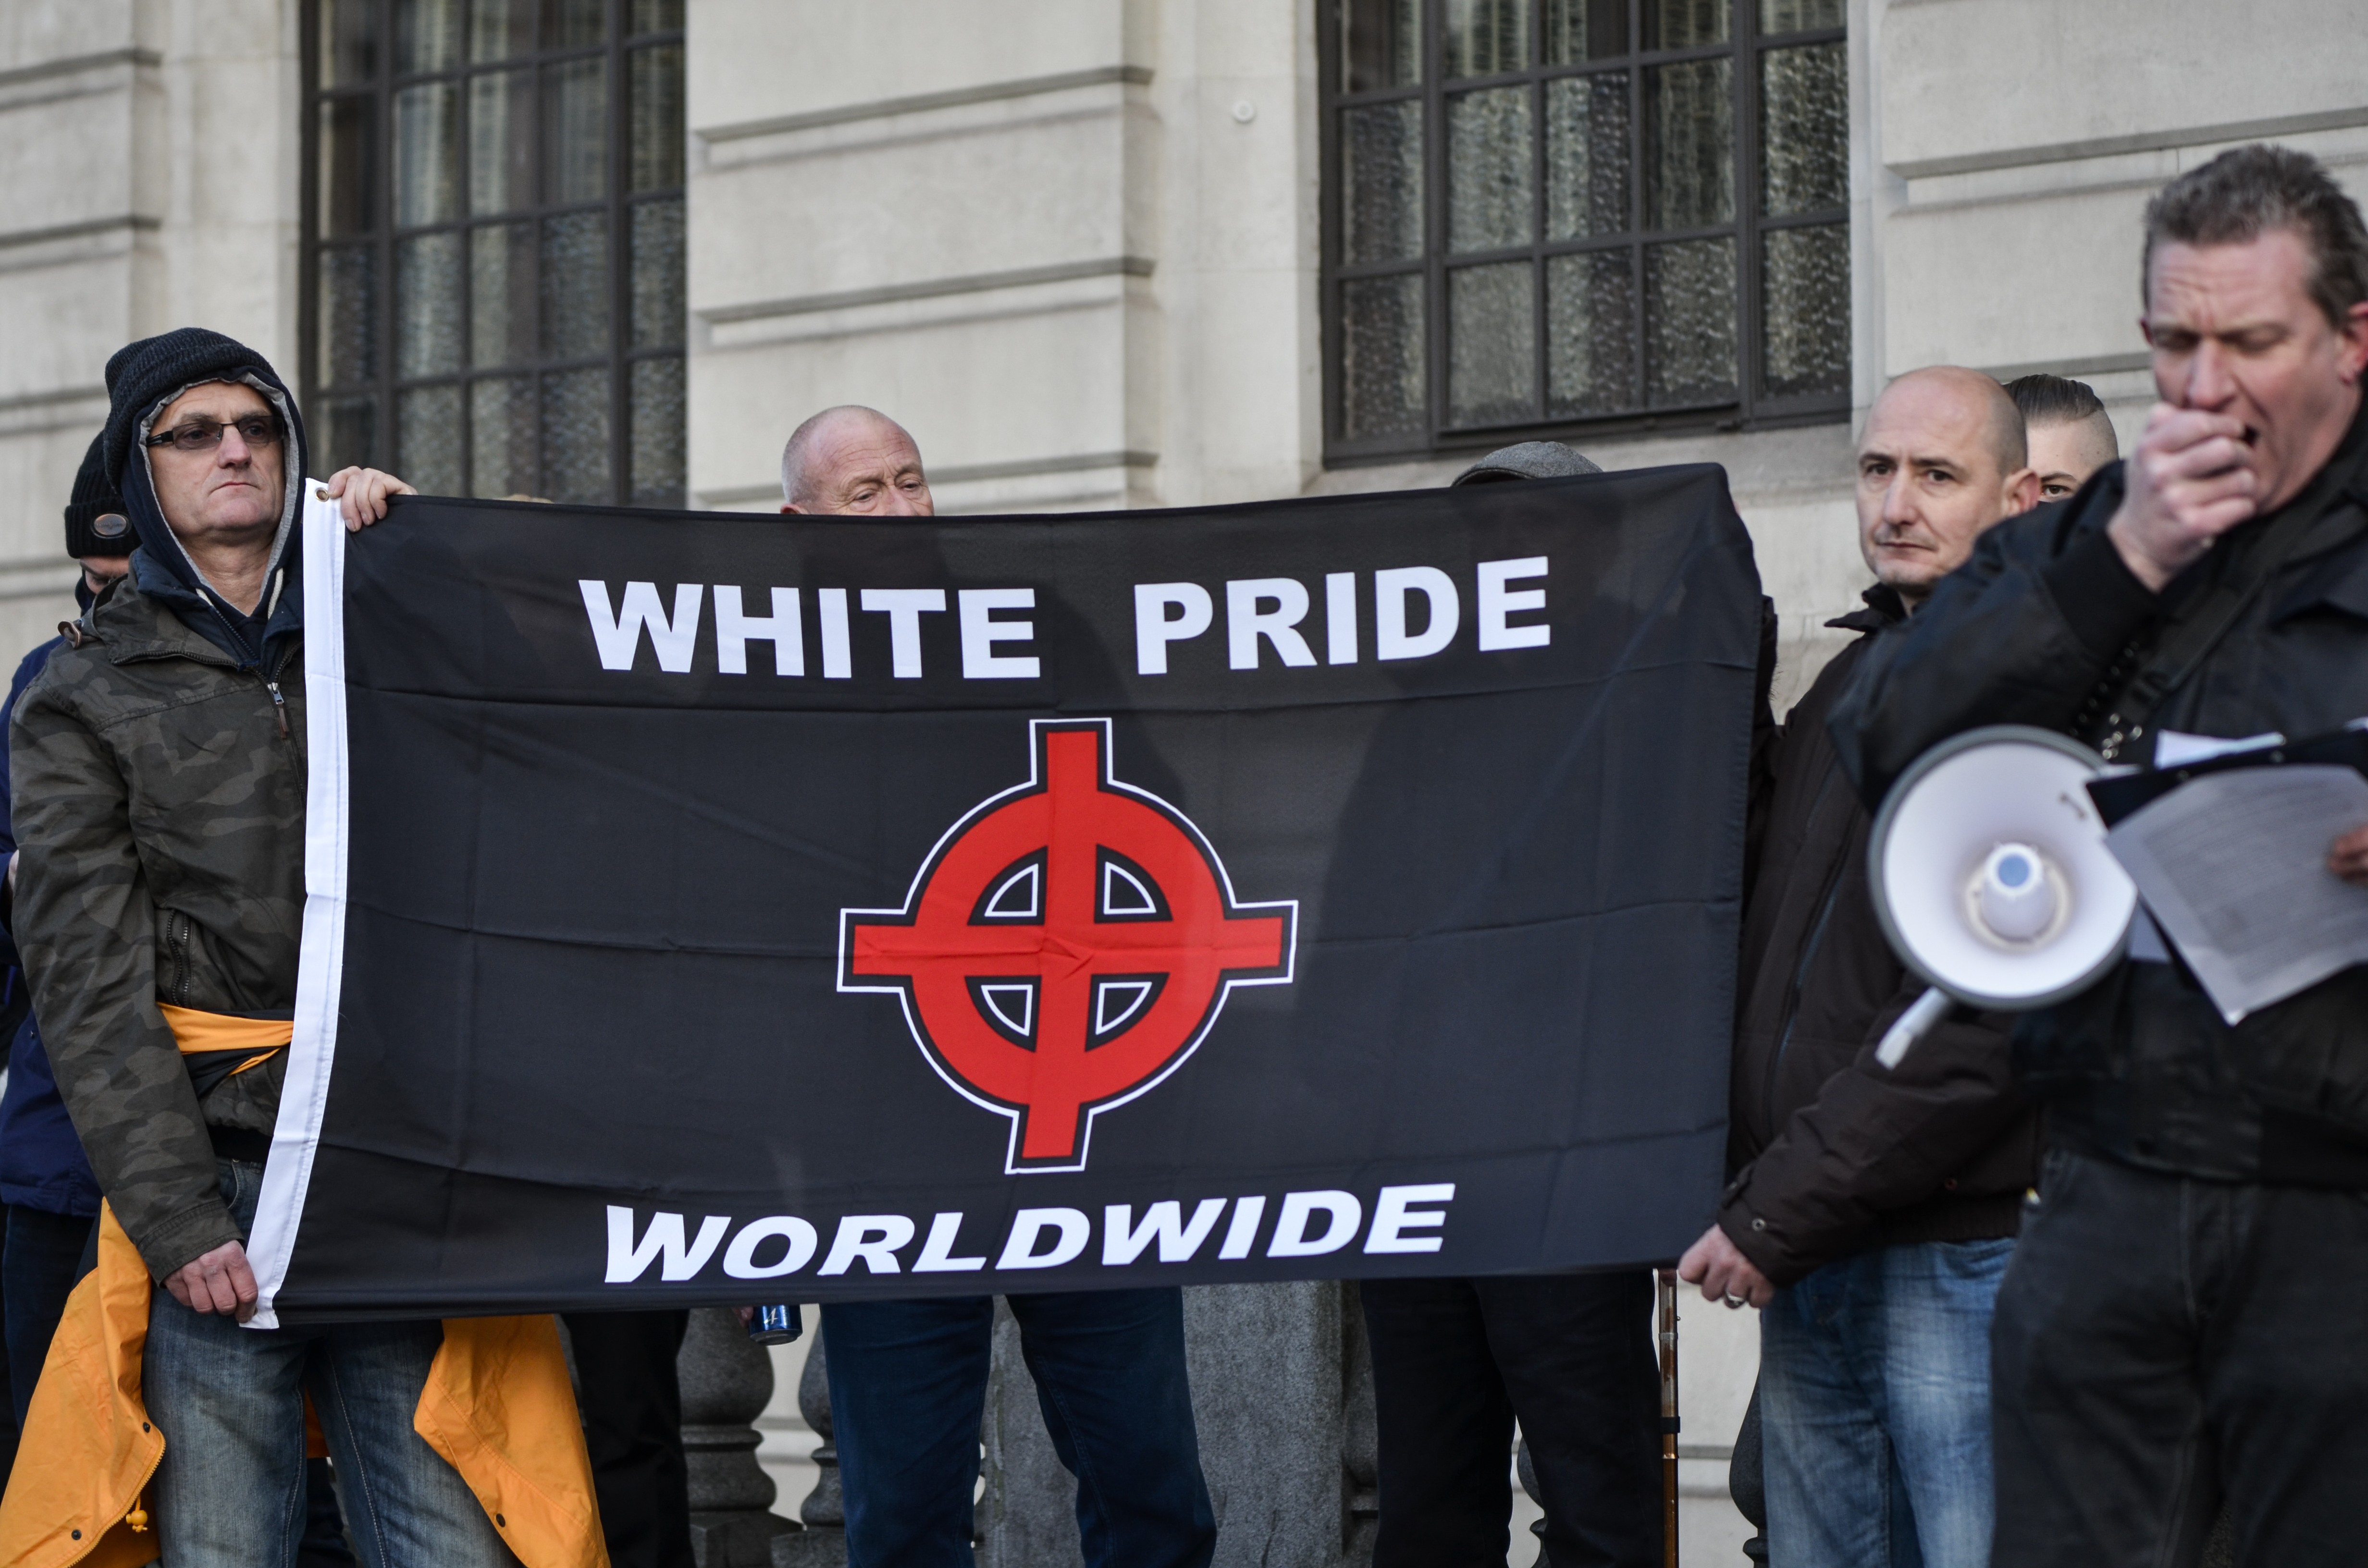 &quot;White Pride Worldwide&quot; members protest in London in January.